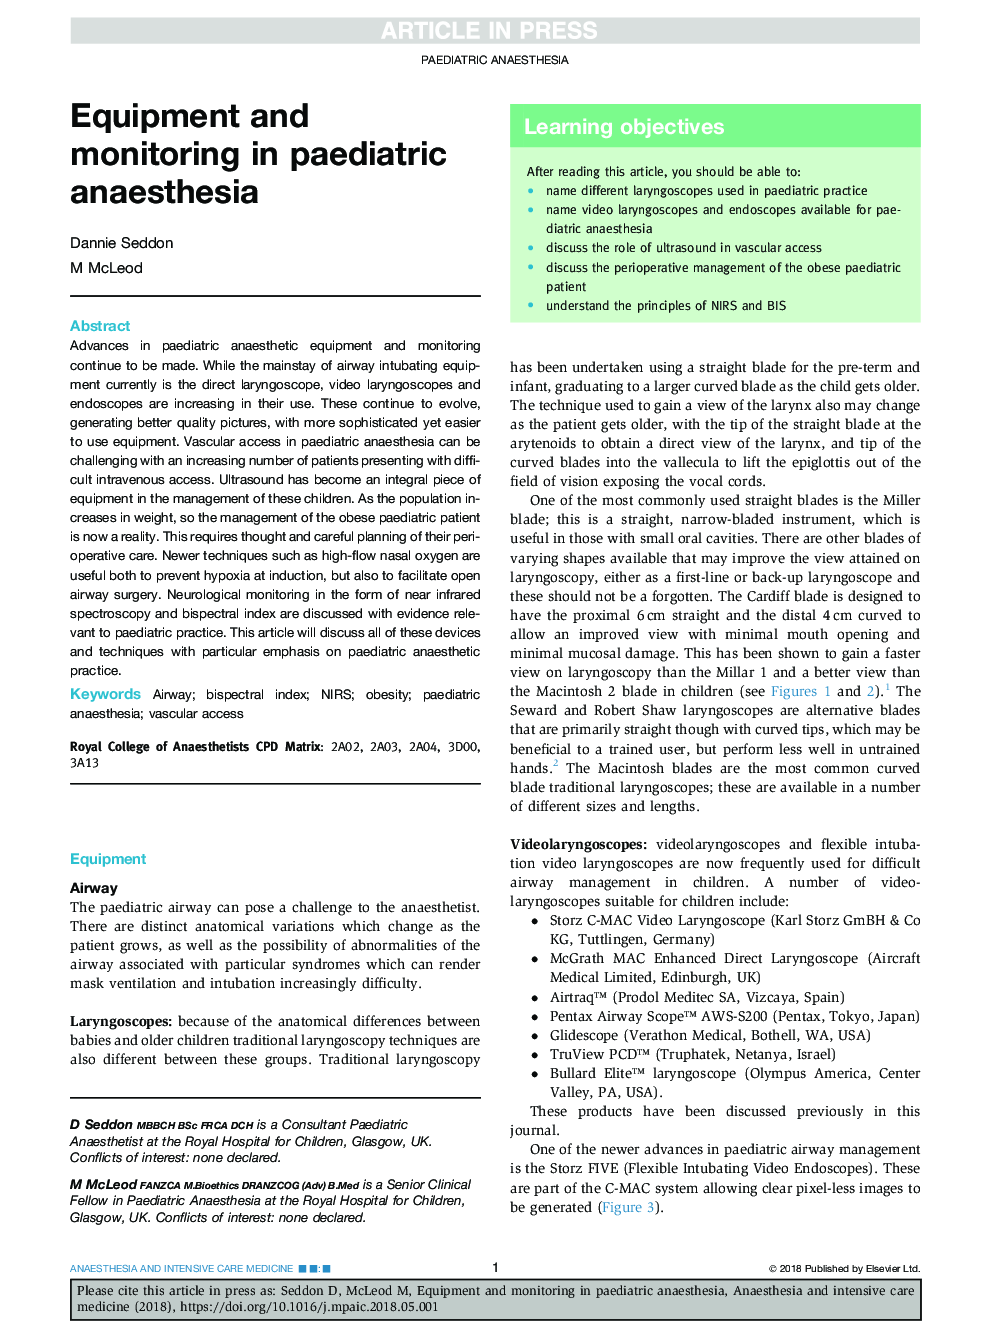 Equipment and monitoring in paediatric anaesthesia